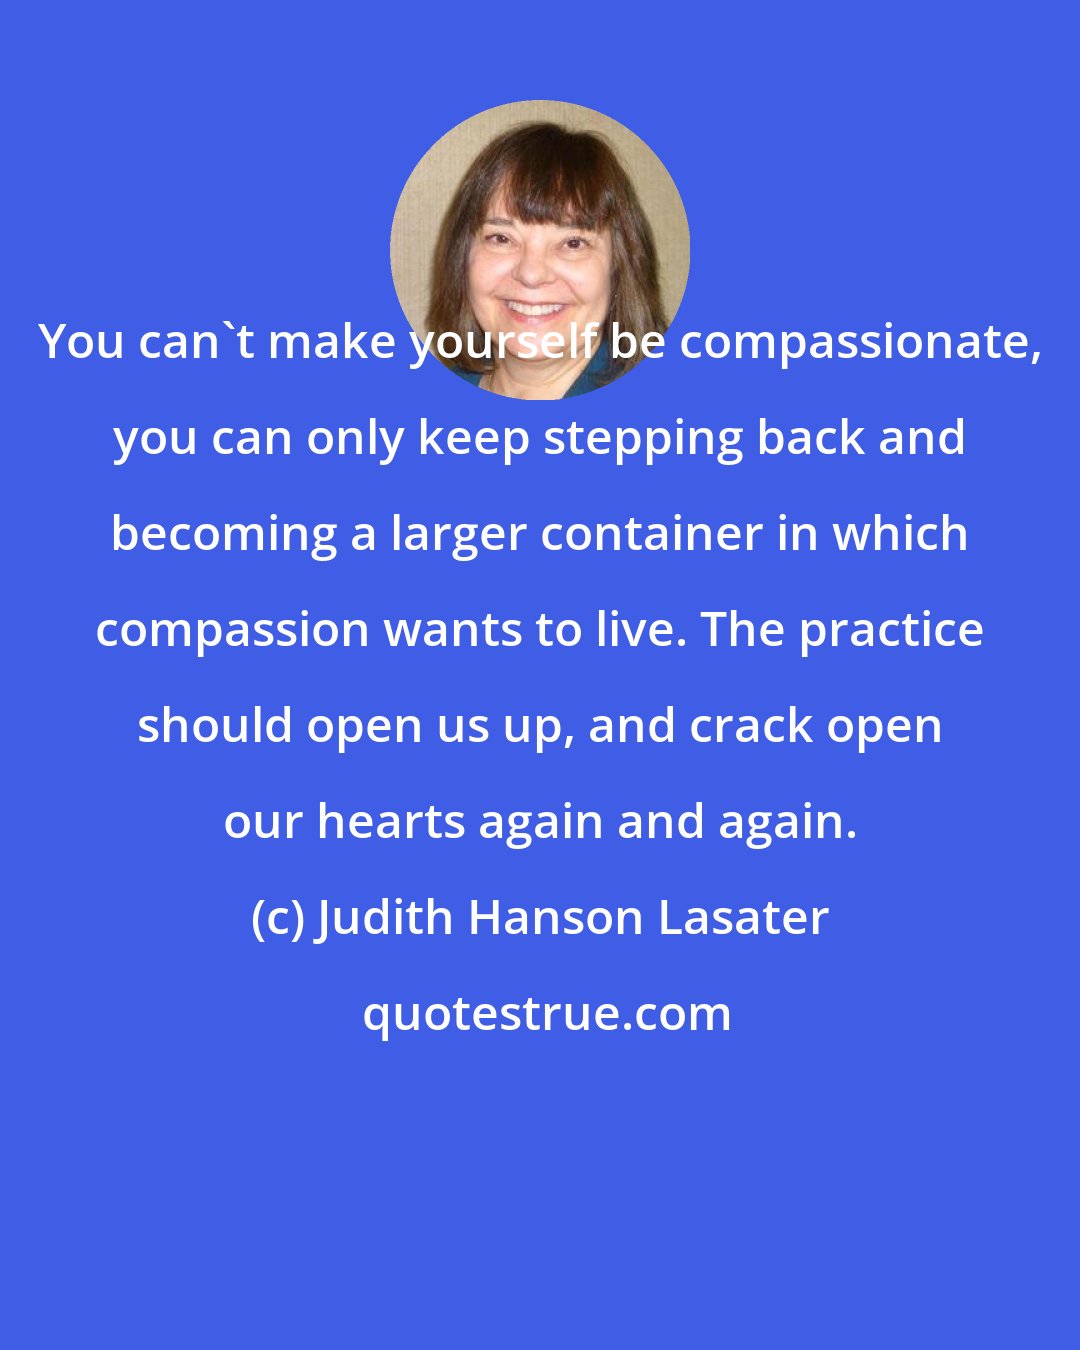 Judith Hanson Lasater: You can't make yourself be compassionate, you can only keep stepping back and becoming a larger container in which compassion wants to live. The practice should open us up, and crack open our hearts again and again.